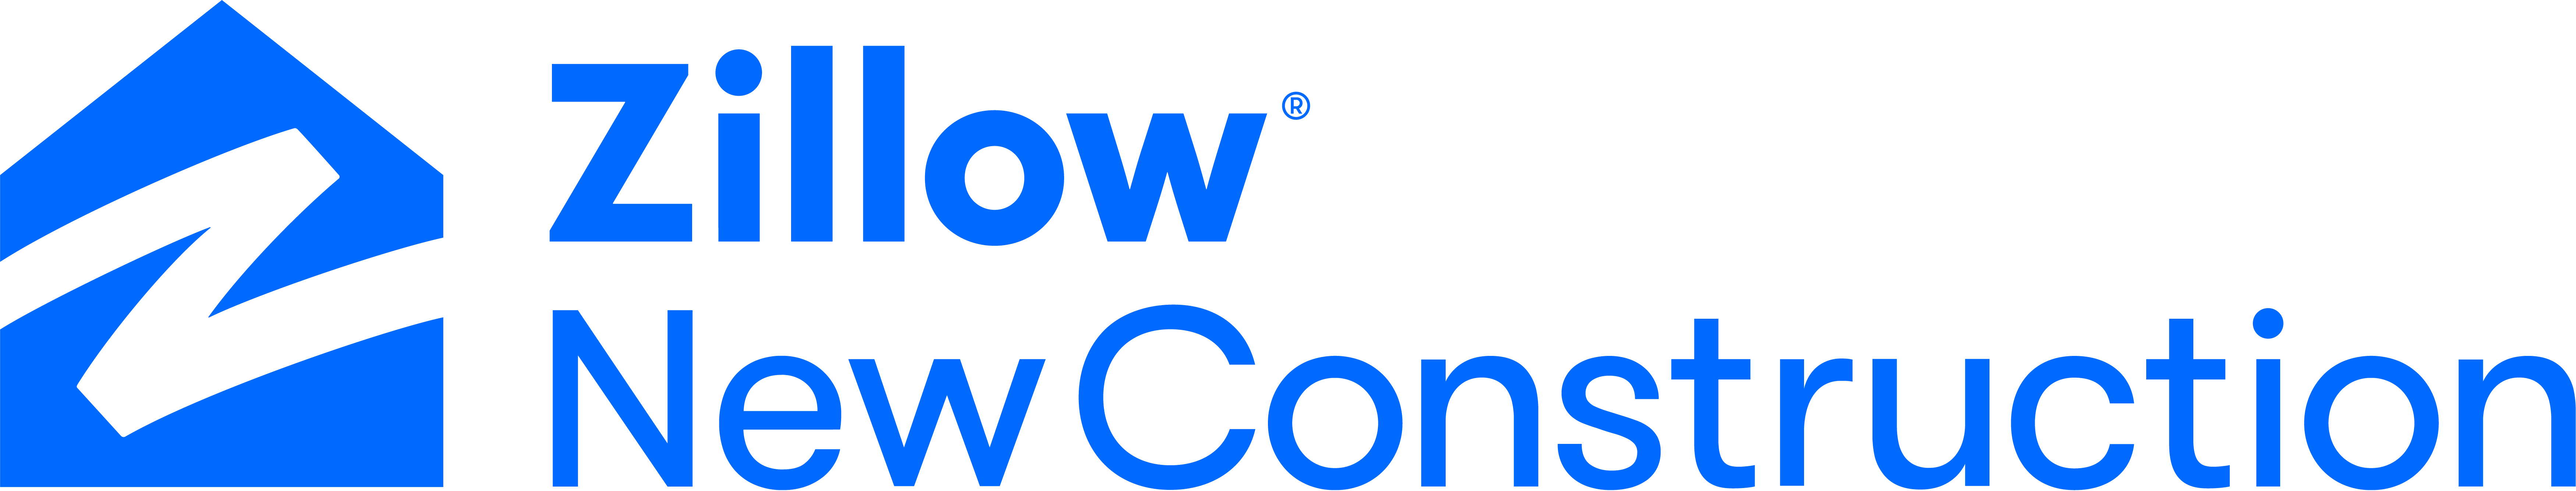 Zillow New Construction